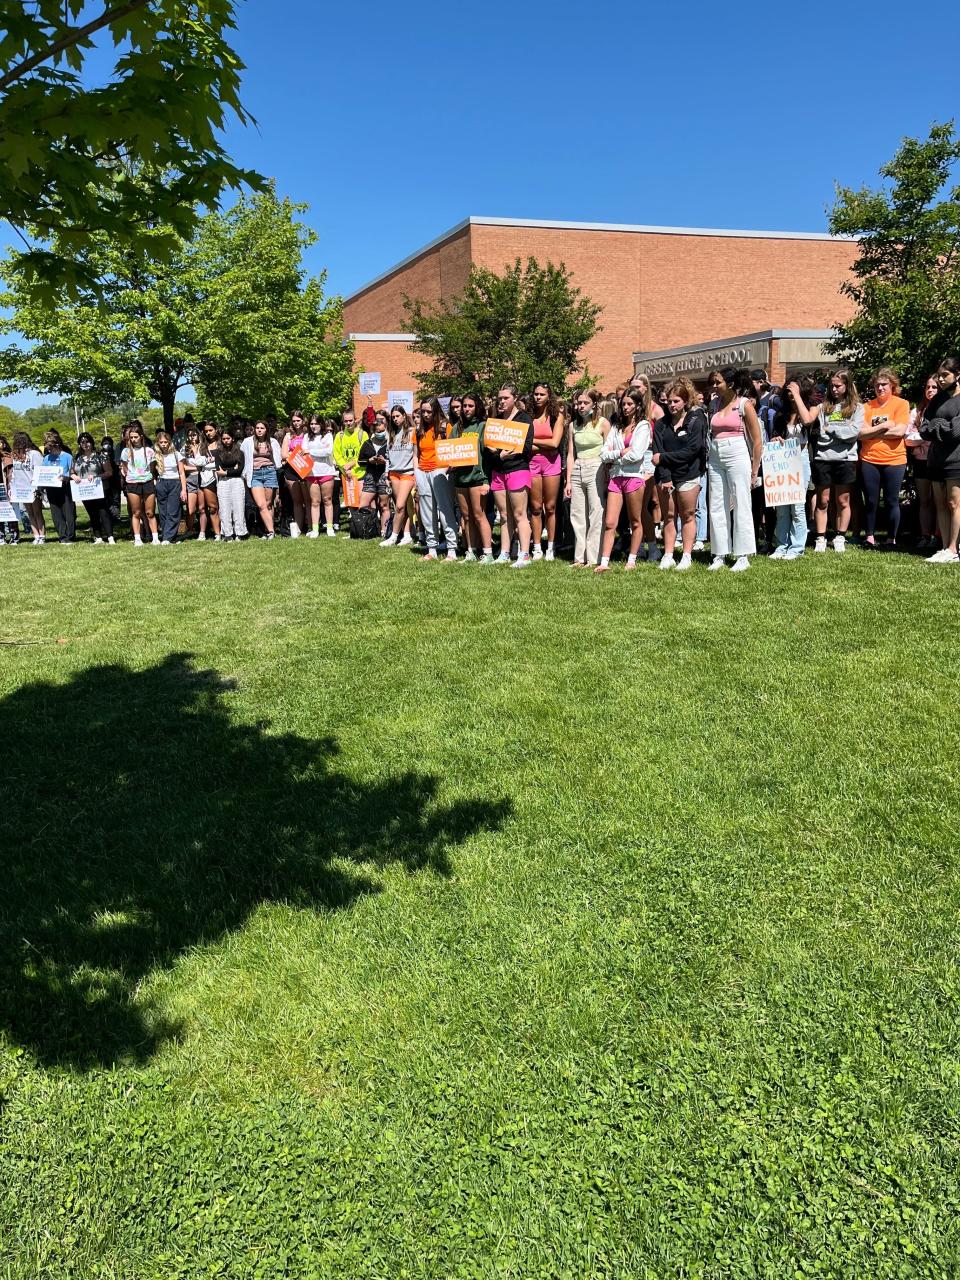 Hundreds of students walked out of their classrooms mid-morning on Wednesday, May 25, 2022, in response to the school massacre that took 21 lives in Uvalde, Texas, the day prior. The walkout was organized by the local chapter of Students Demand Action, which advocates for stricter gun laws.